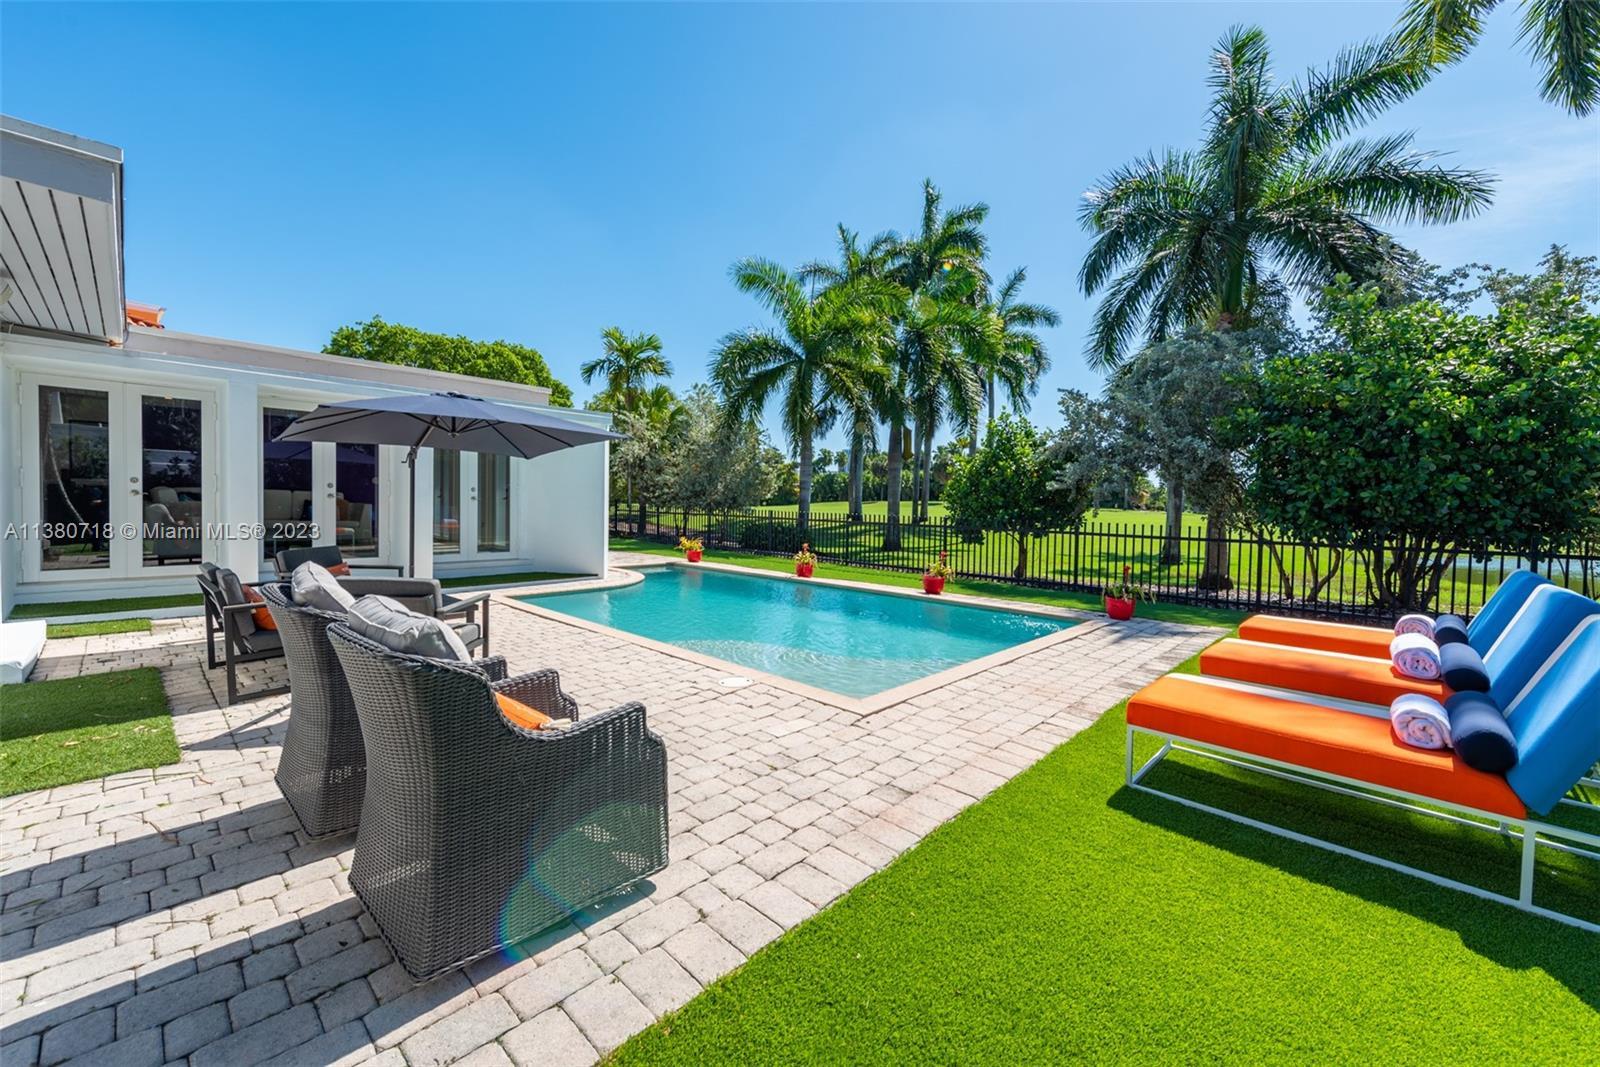 This stunning 3-bed/3-bath Miami Beach home offers breathtaking views of La Gorce golf course. This 